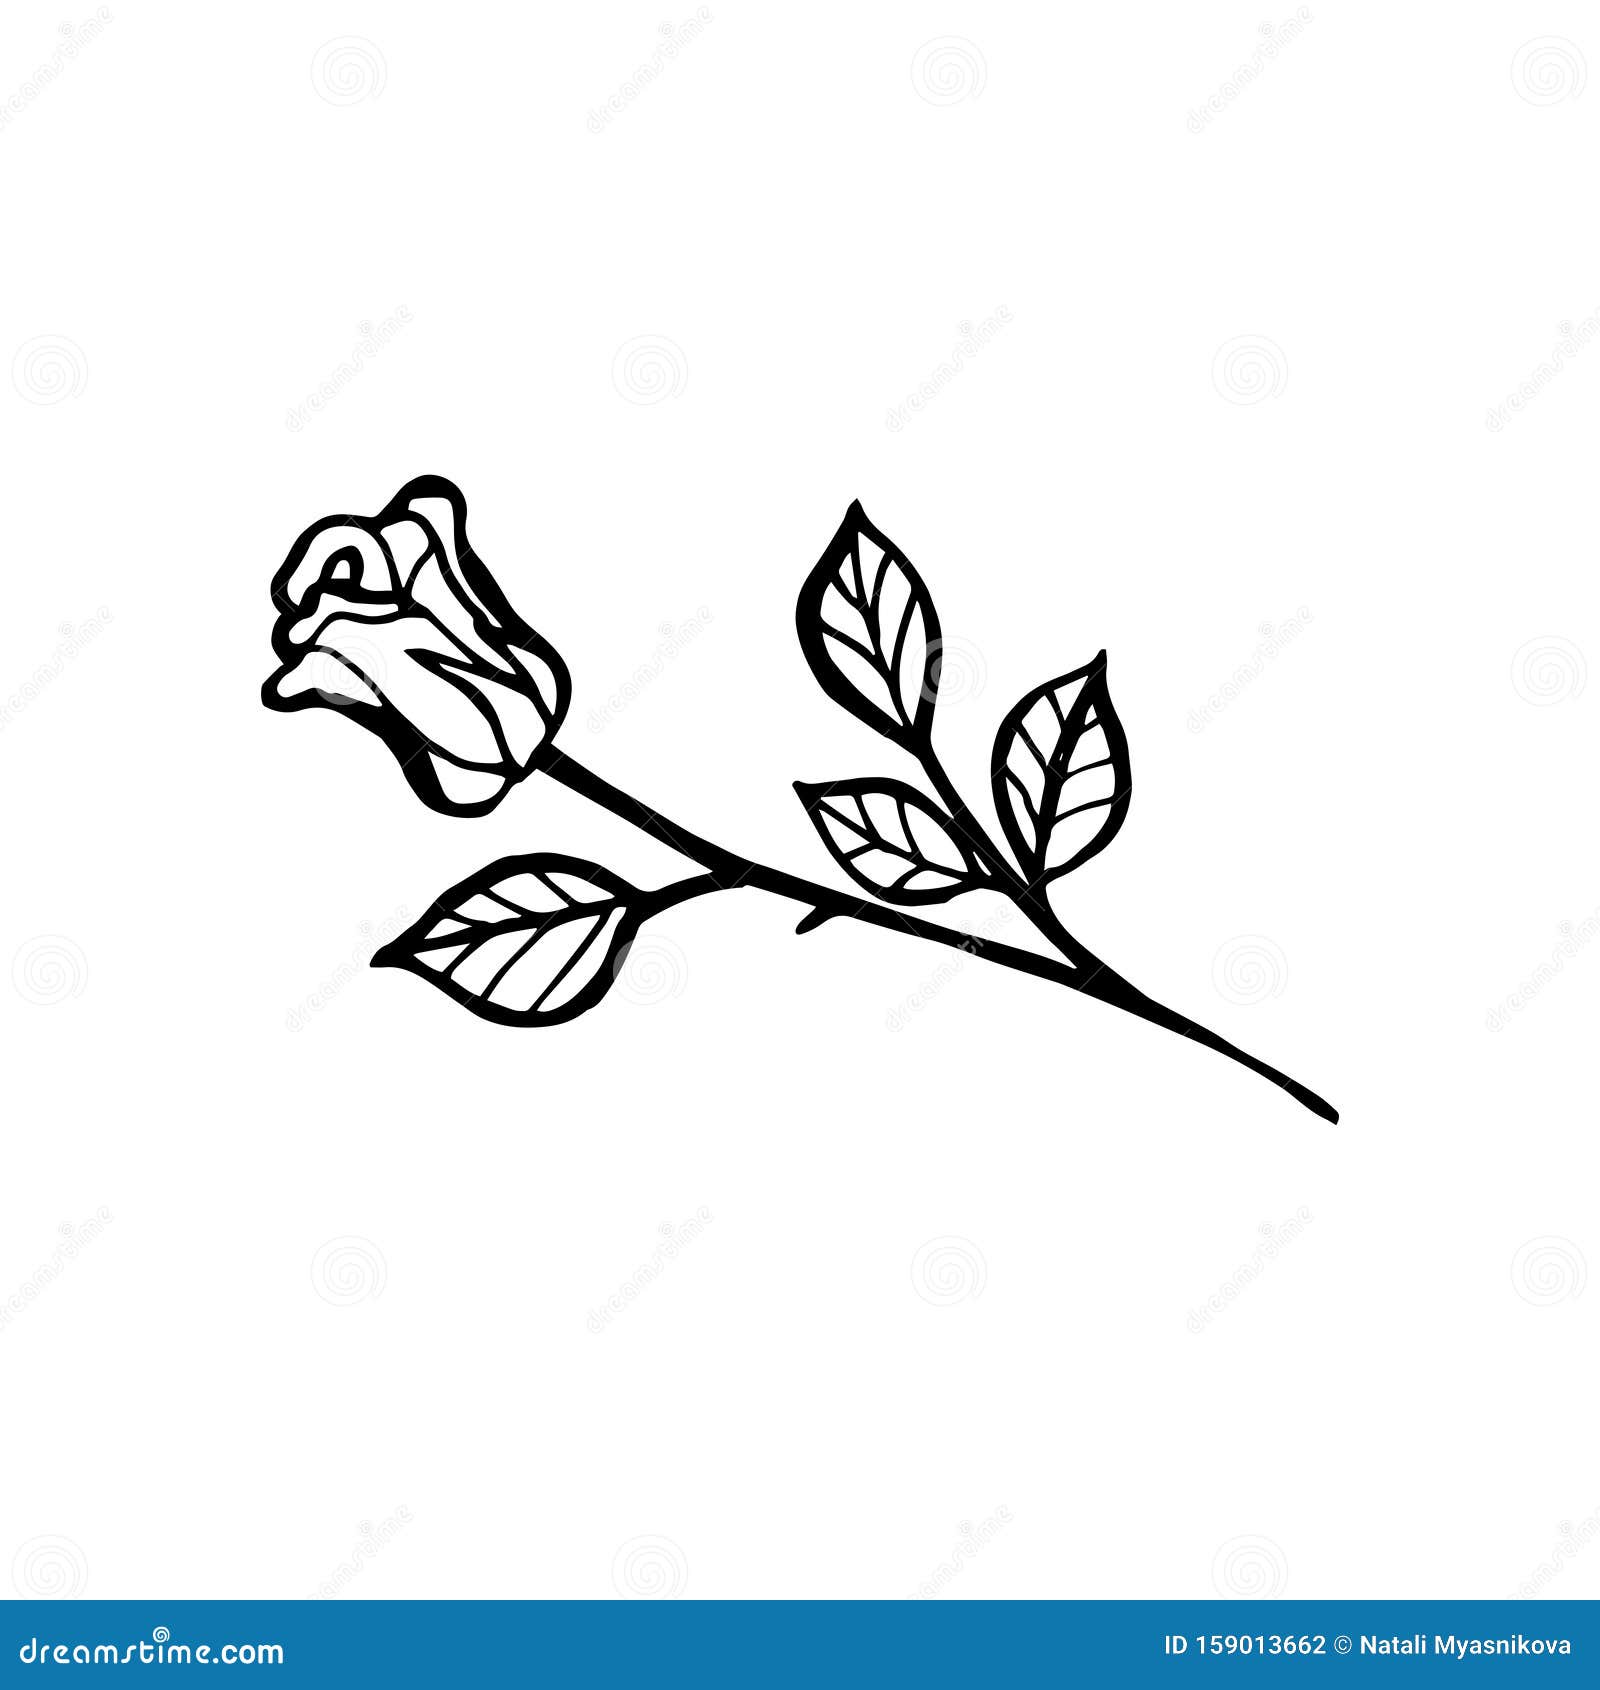 Black and White Line Drawing of Rose Flower Tattoo Design Sketch Stock  Vector  Illustration of icon artwork 159060402